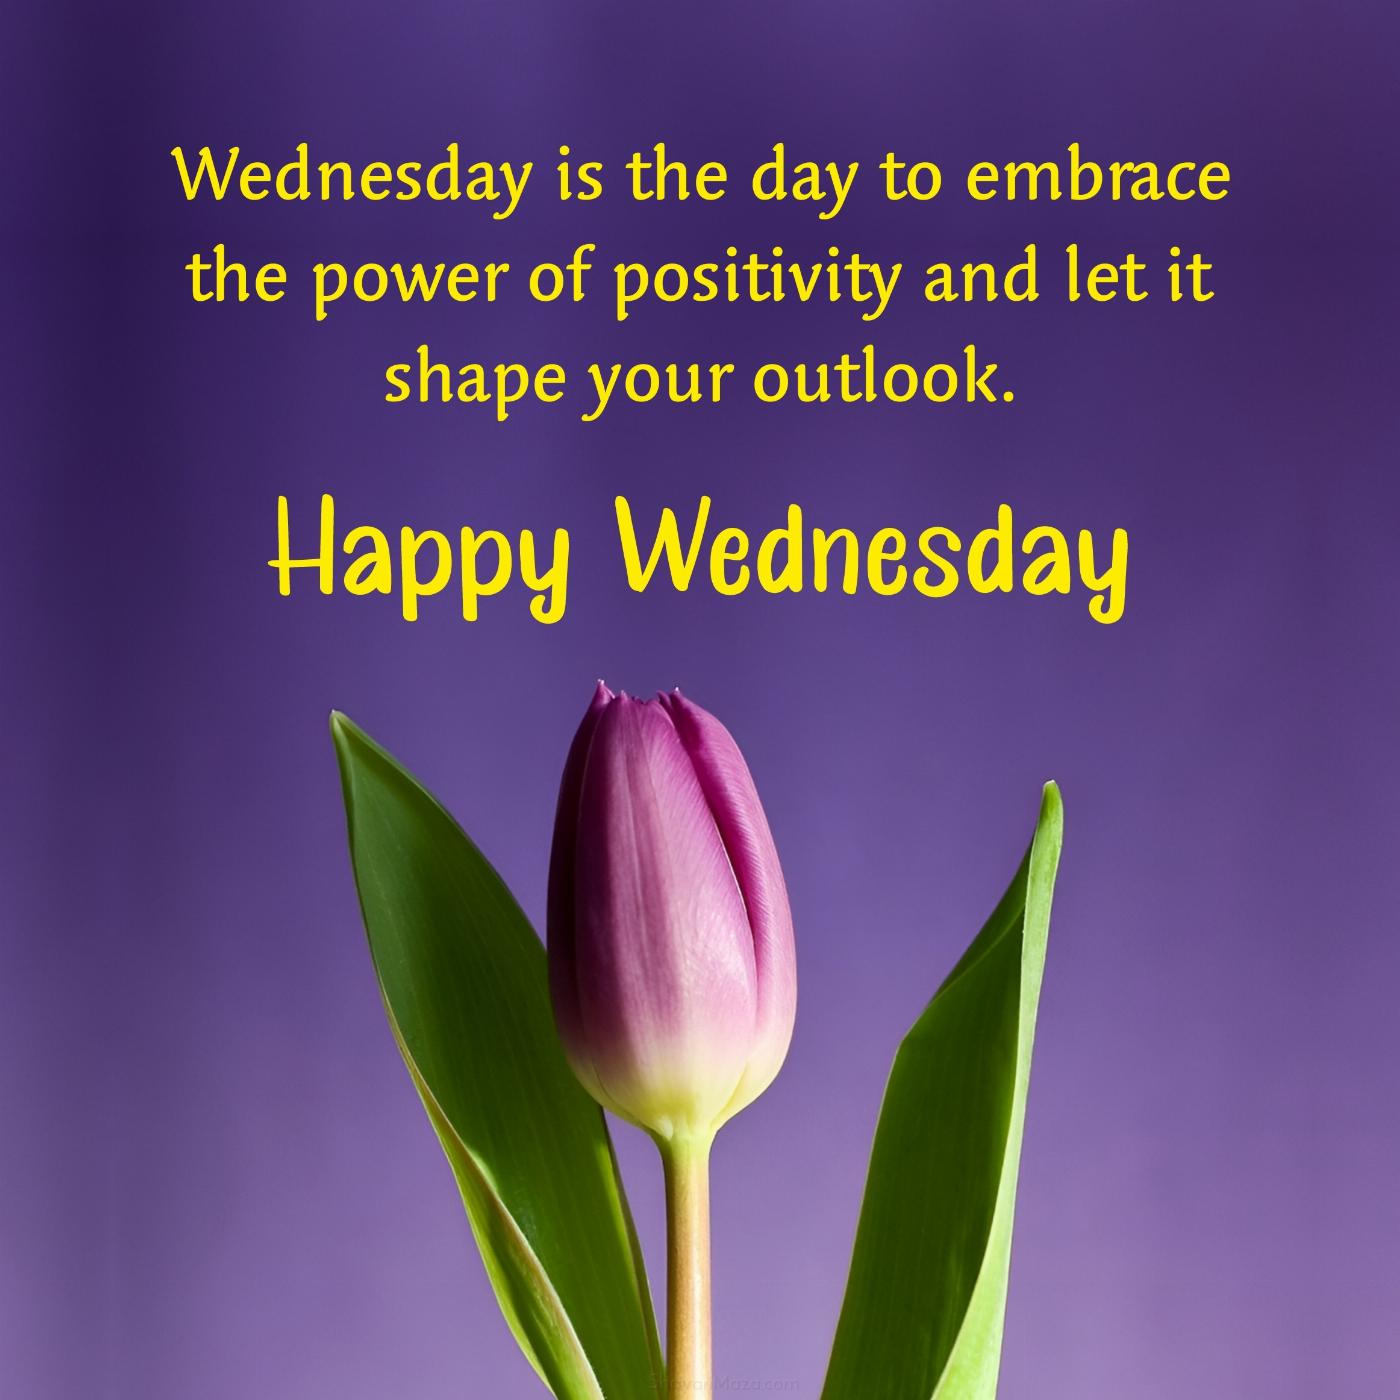 Wednesday is the day to embrace the power of positivity